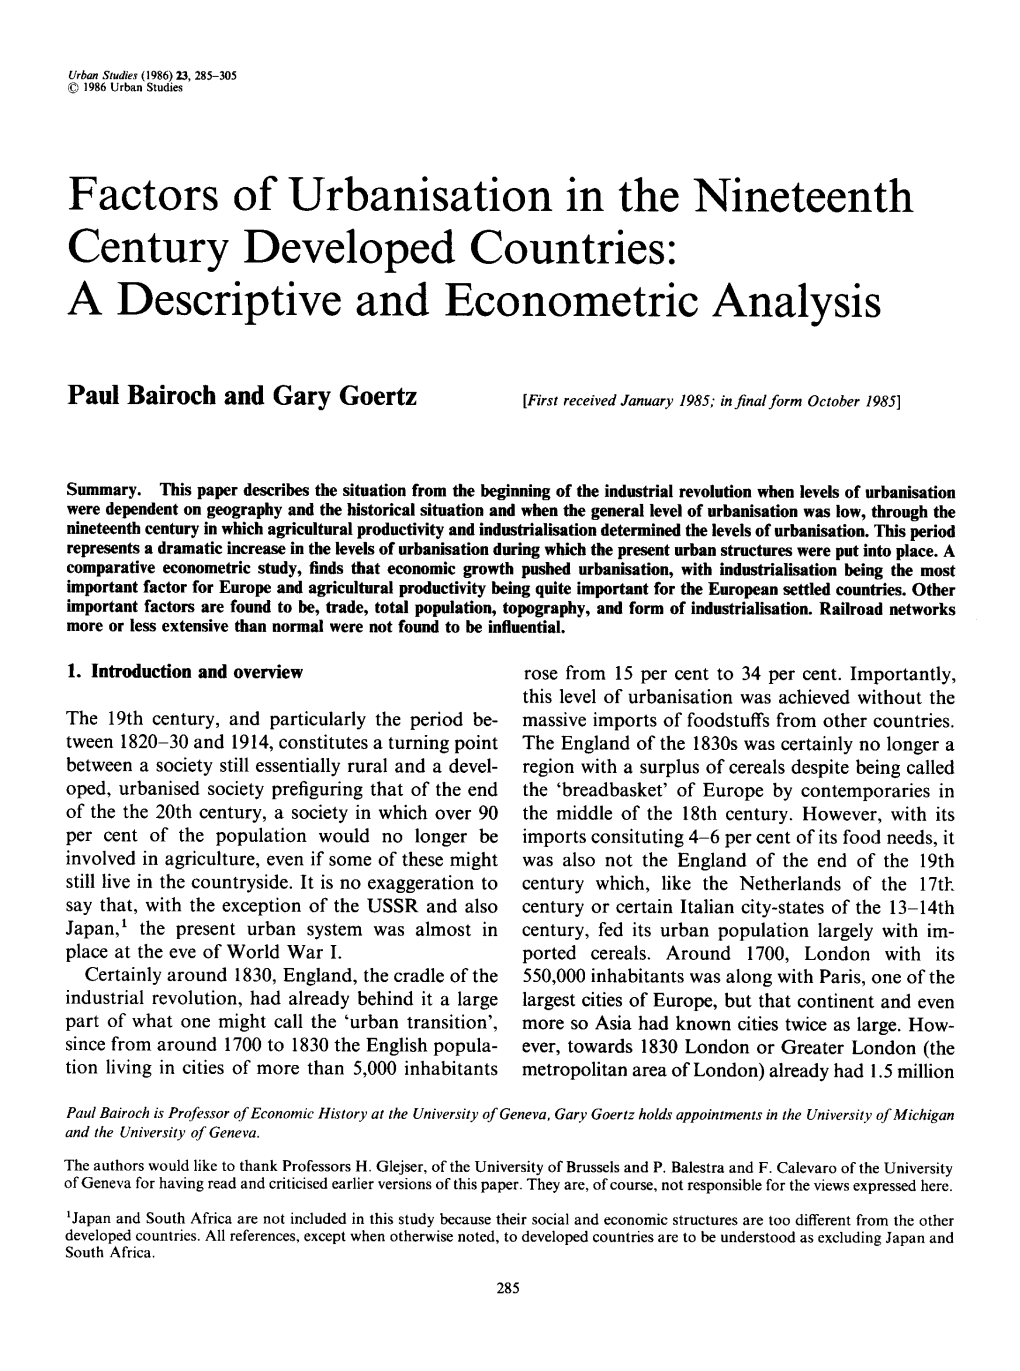 Factors of Urbanisation in the Nineteenth Century Developed Countries: a Descriptive and Econometric Analysis